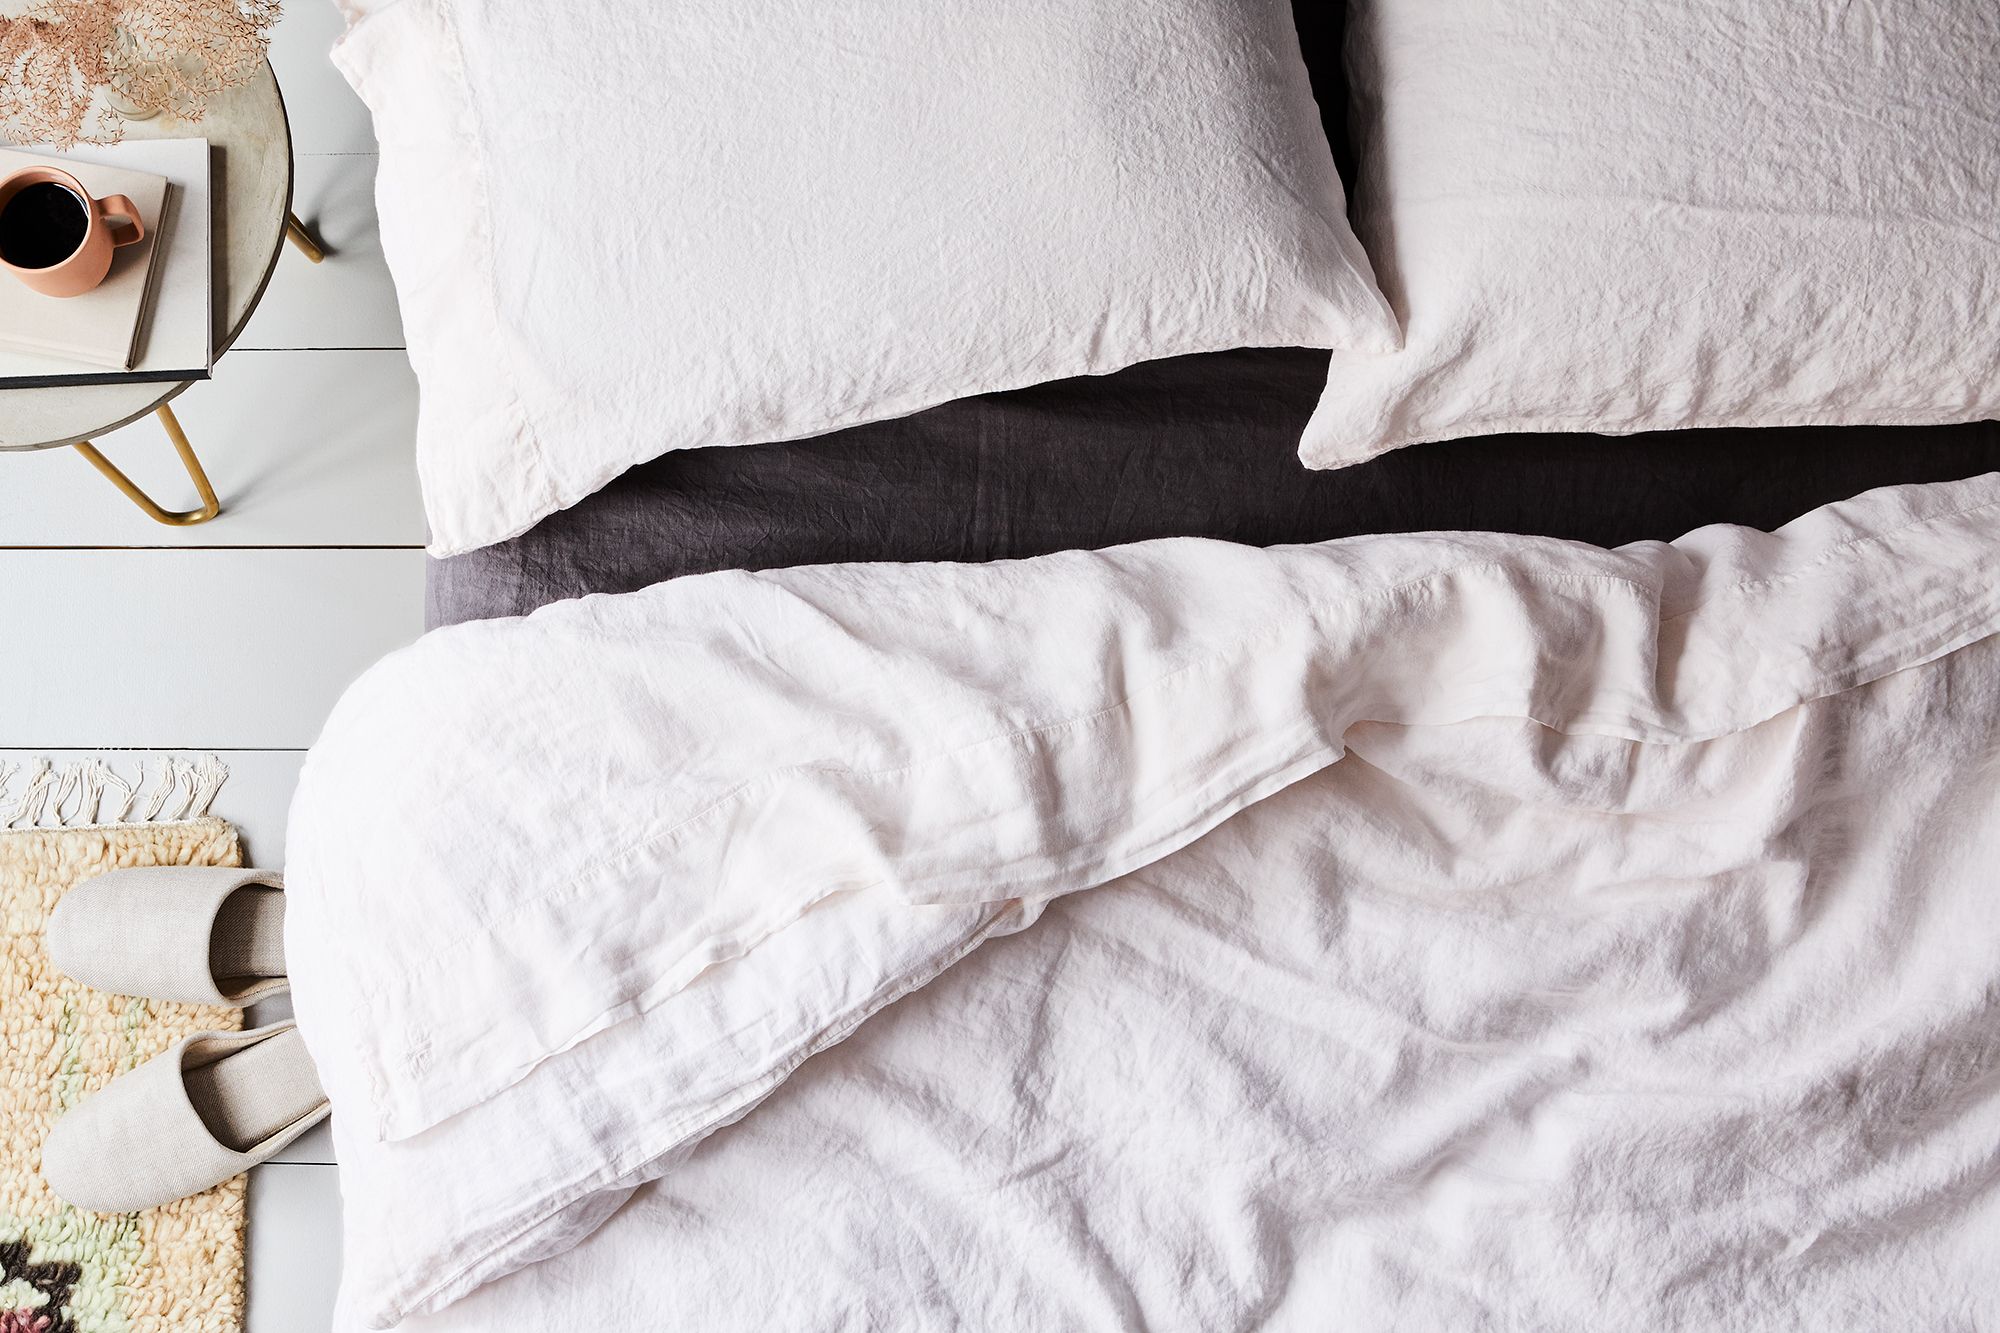 PSA: It's Definitely Time to Toss or Wash Your Pillows